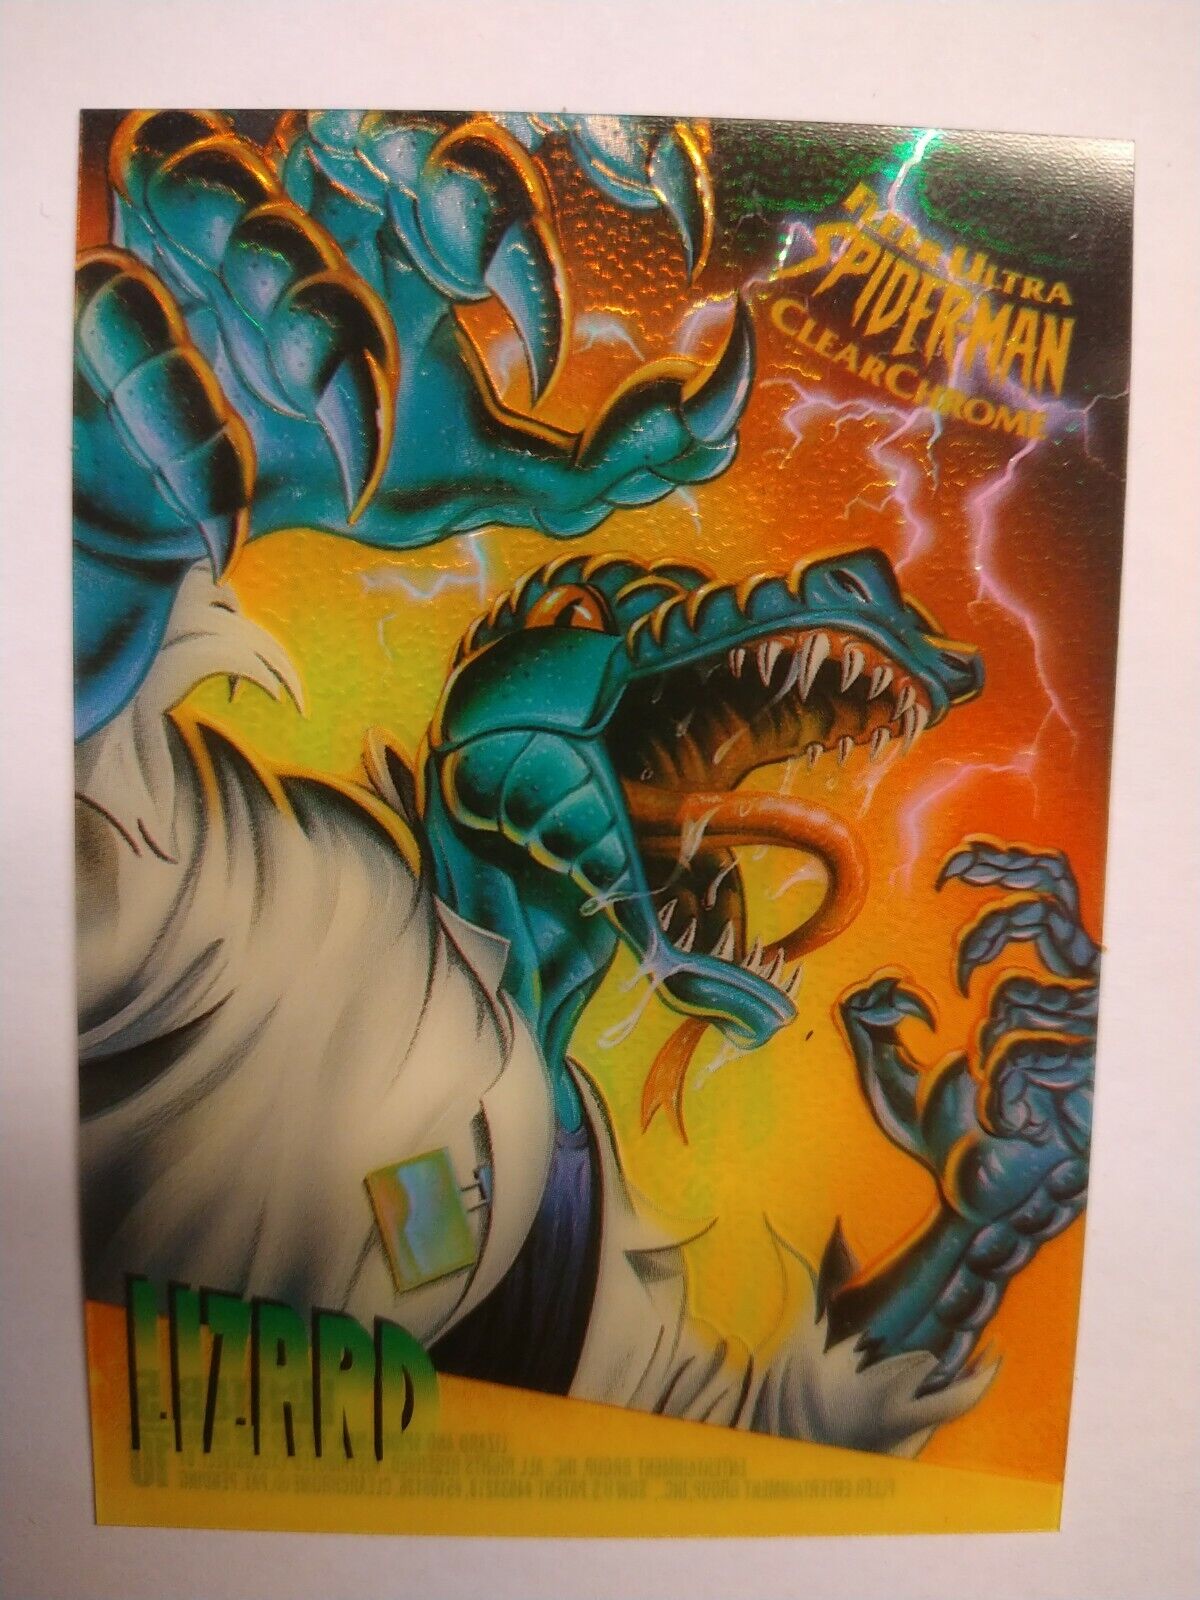 Marvel Spiderman 95 Clearchrome #5 of 10 Lizard NEW OLD STOCK See Description